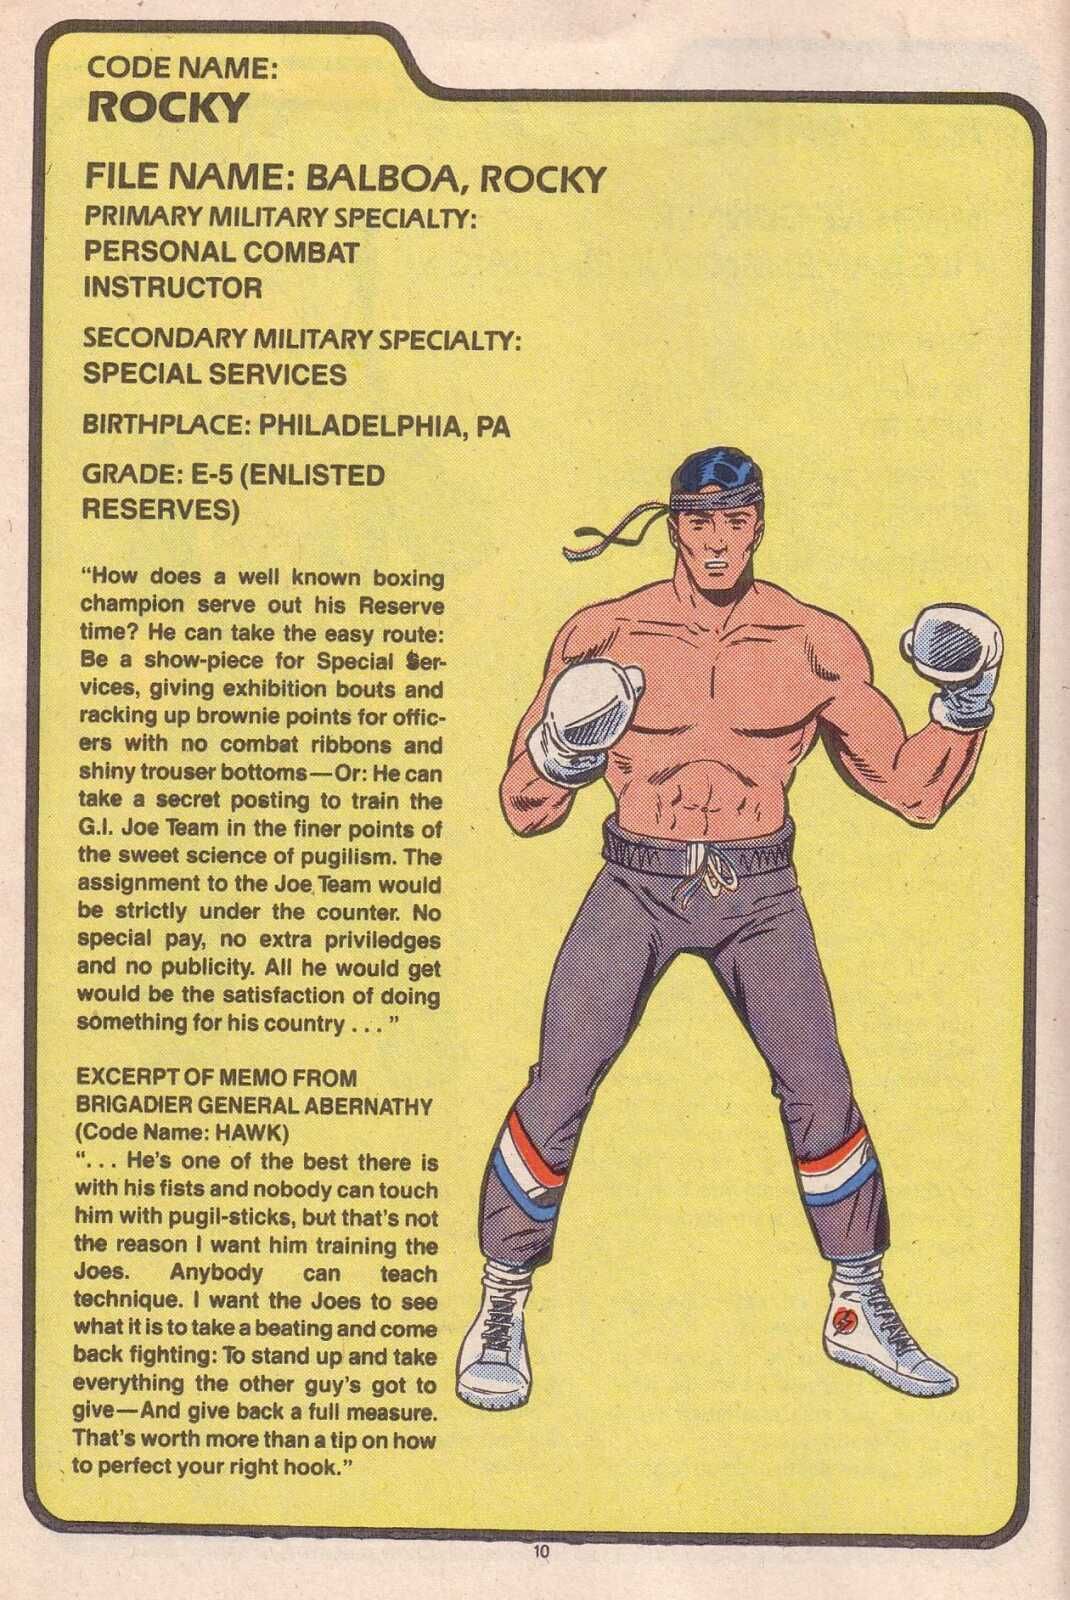 G.I. Joe Made Rocky Balboa A Member (And Why He Was Removed)